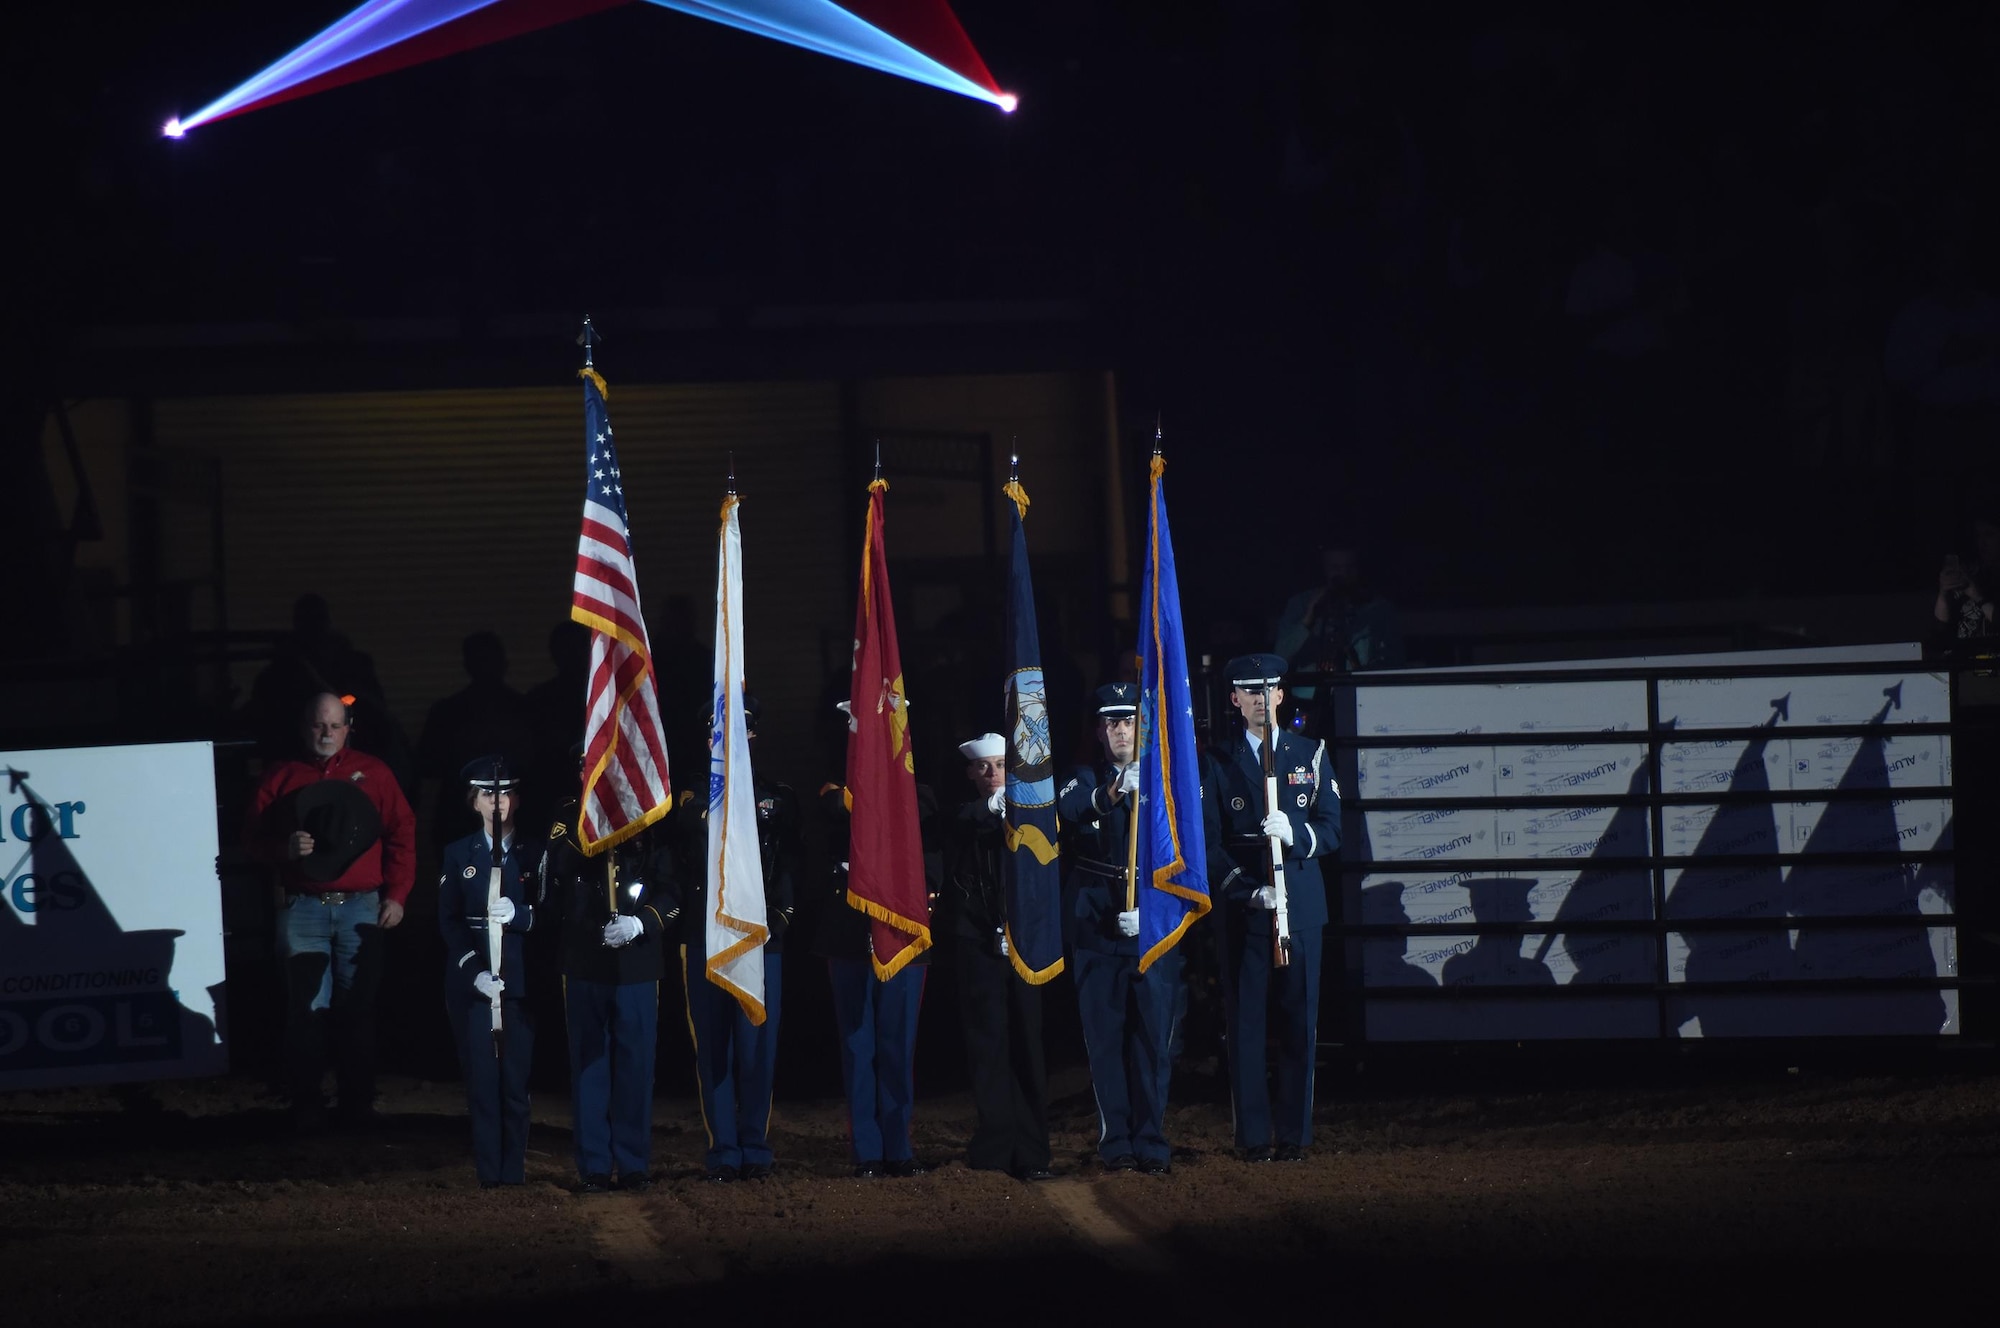 The Goodfellow Air Force Base Joint-Service Color Guard present the colors during the 85th Annual San Angelo Stock Show and Rodeo Military Appreciation Night at the Foster Communications Coliseum in San Angelo, Texas, Feb. 15, 2017. Goodfellow Air Force Base’s Patriotic Blue sang "The Star-Spangled Banner" during the presentation of the colors. (U.S. Air Force photo by Staff Sgt. Laura R. McFarlane/Released)